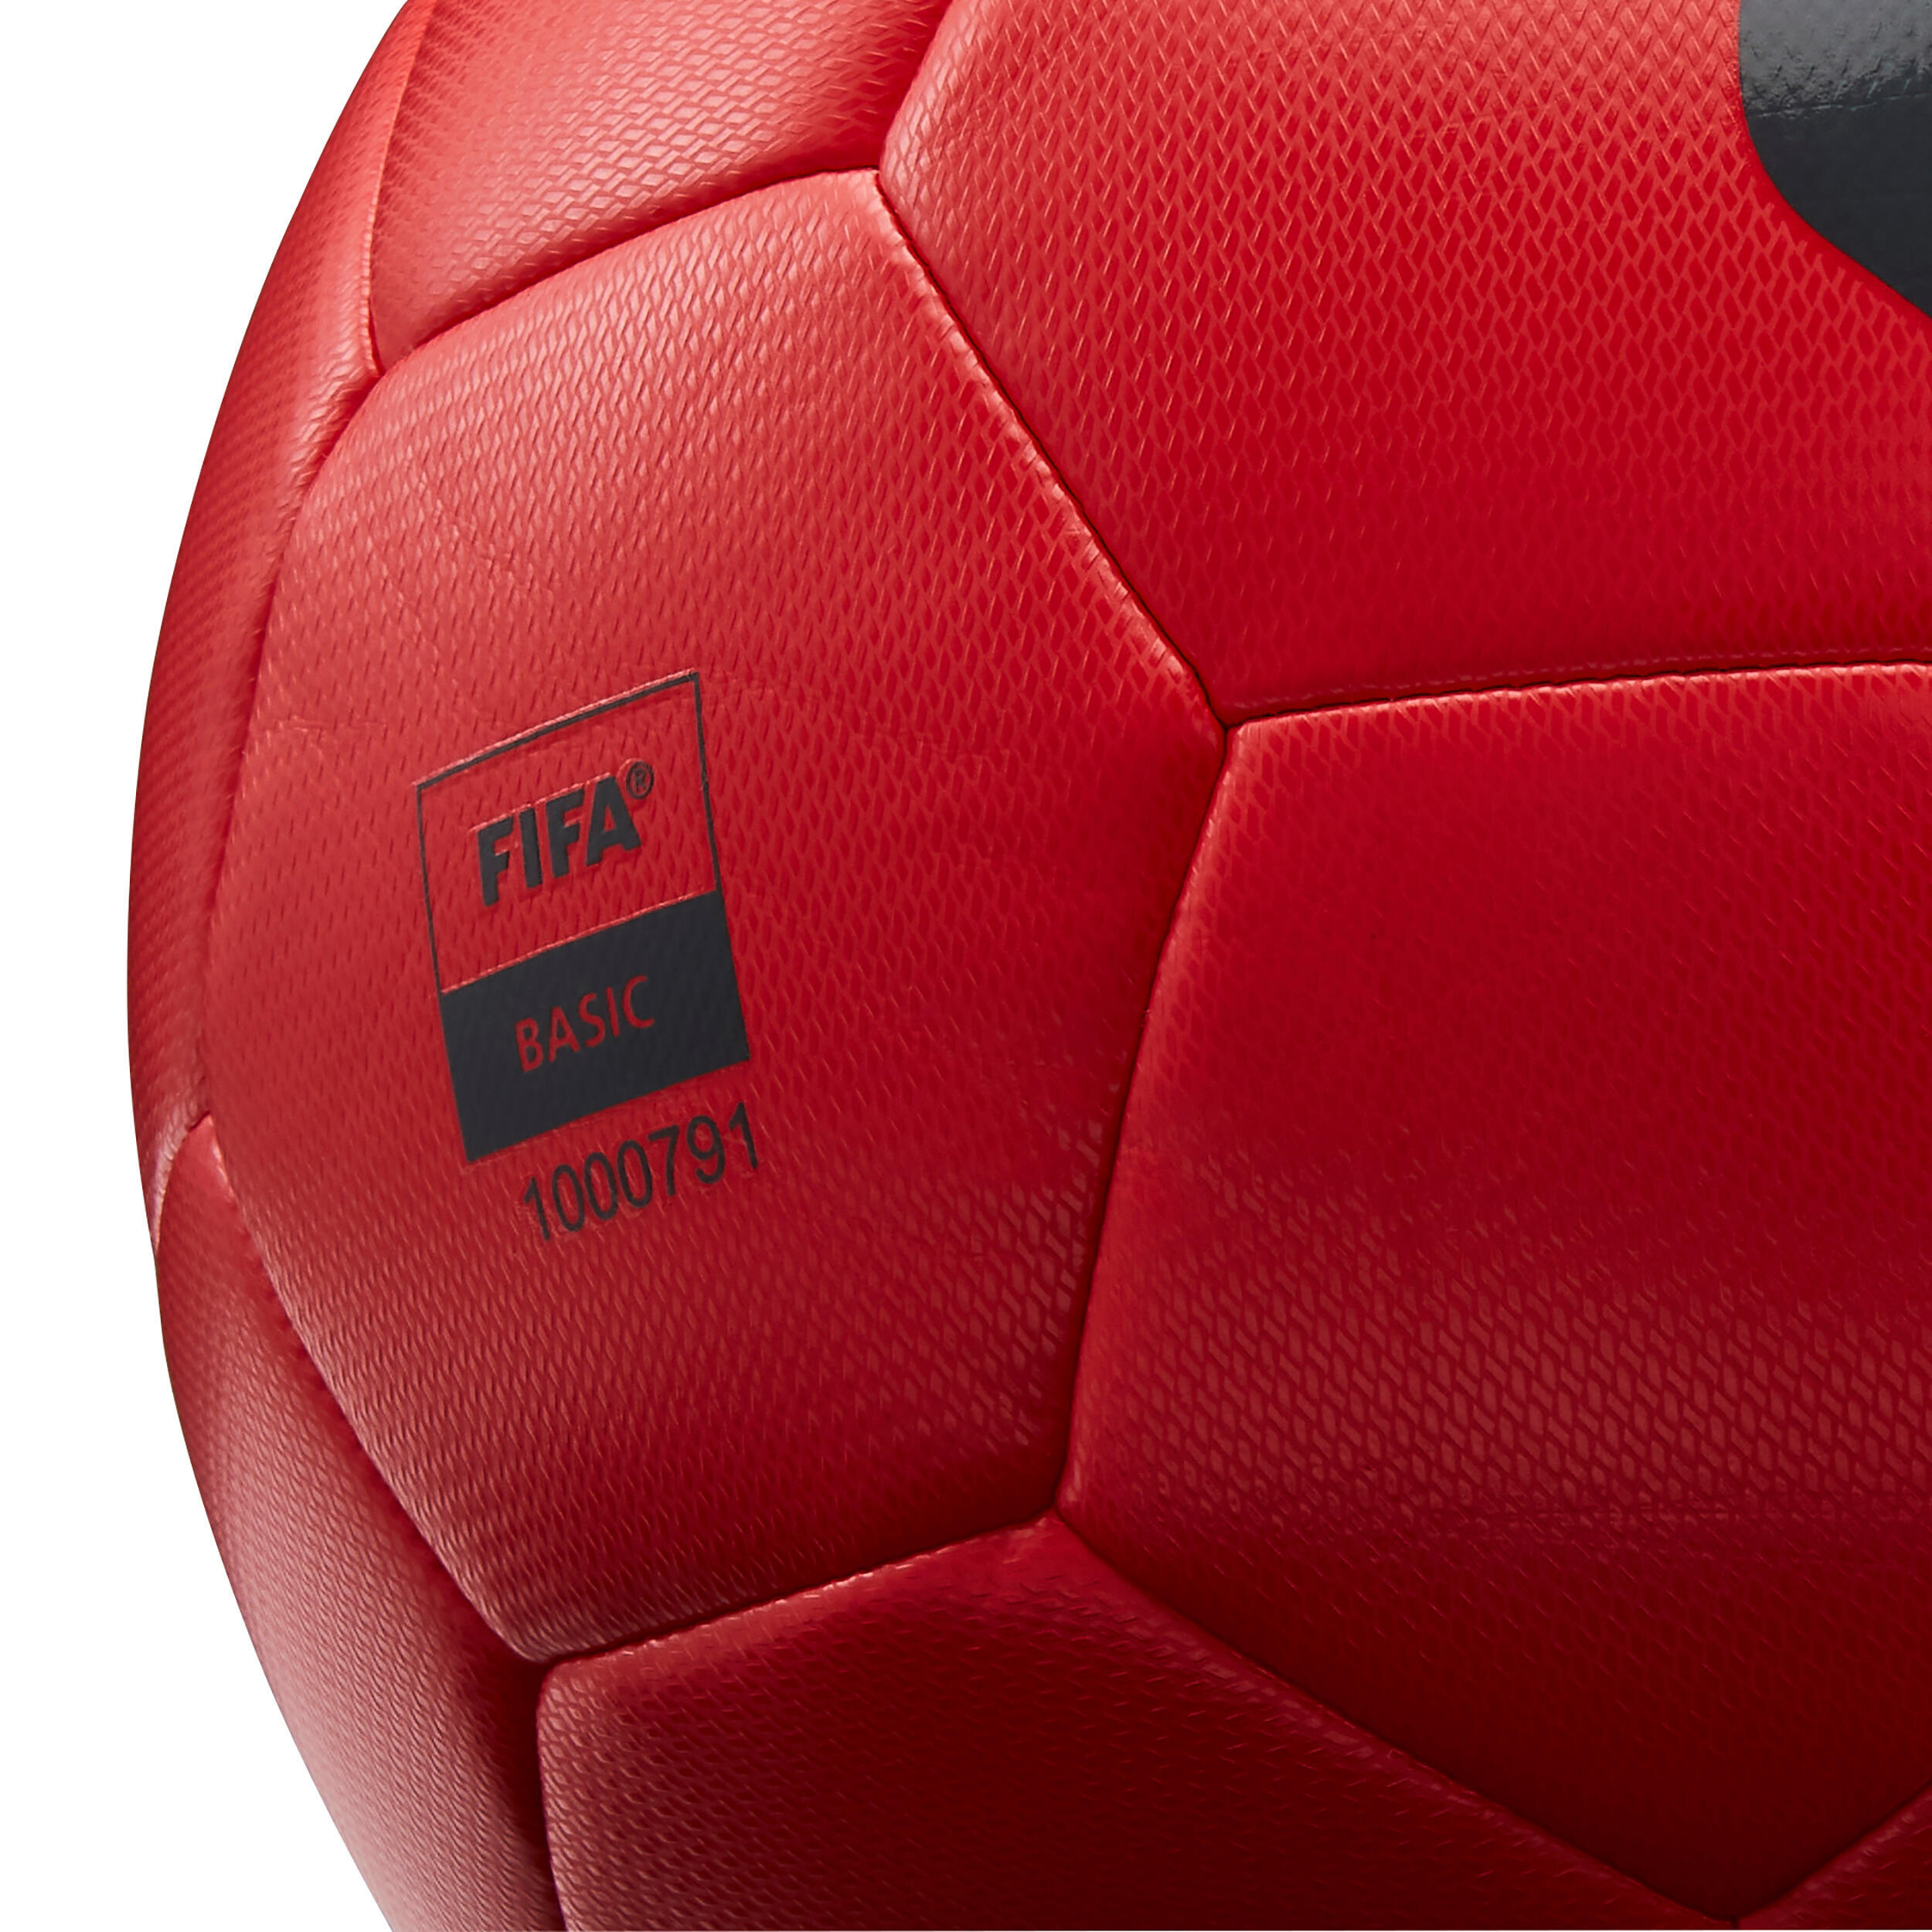 Adult size 5 fifa hybrid football, red 4/7